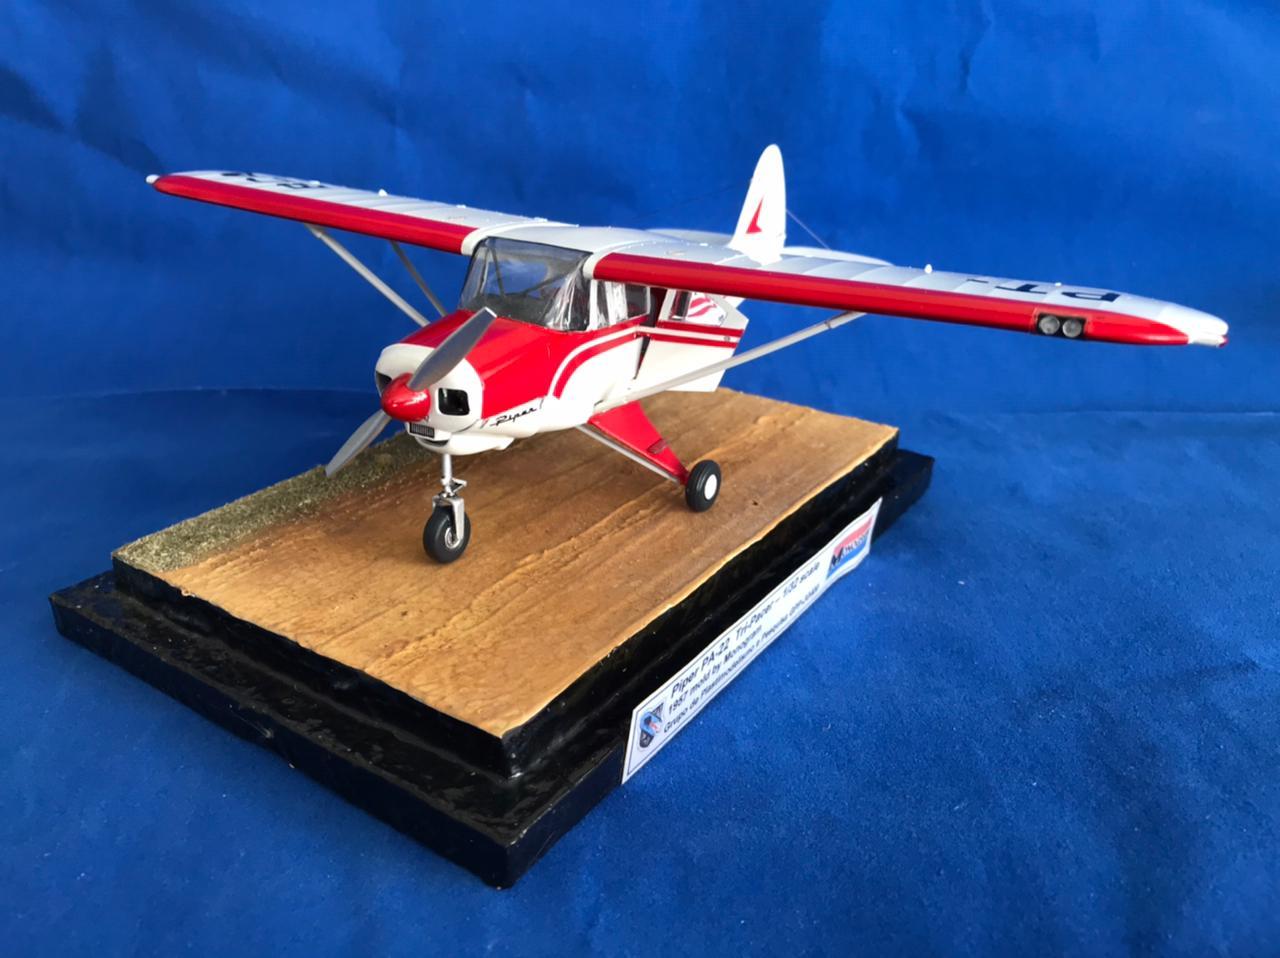 Giant 1/3 Scale Piper PA-22 Tri-Pacer Plans & Templates 115ws